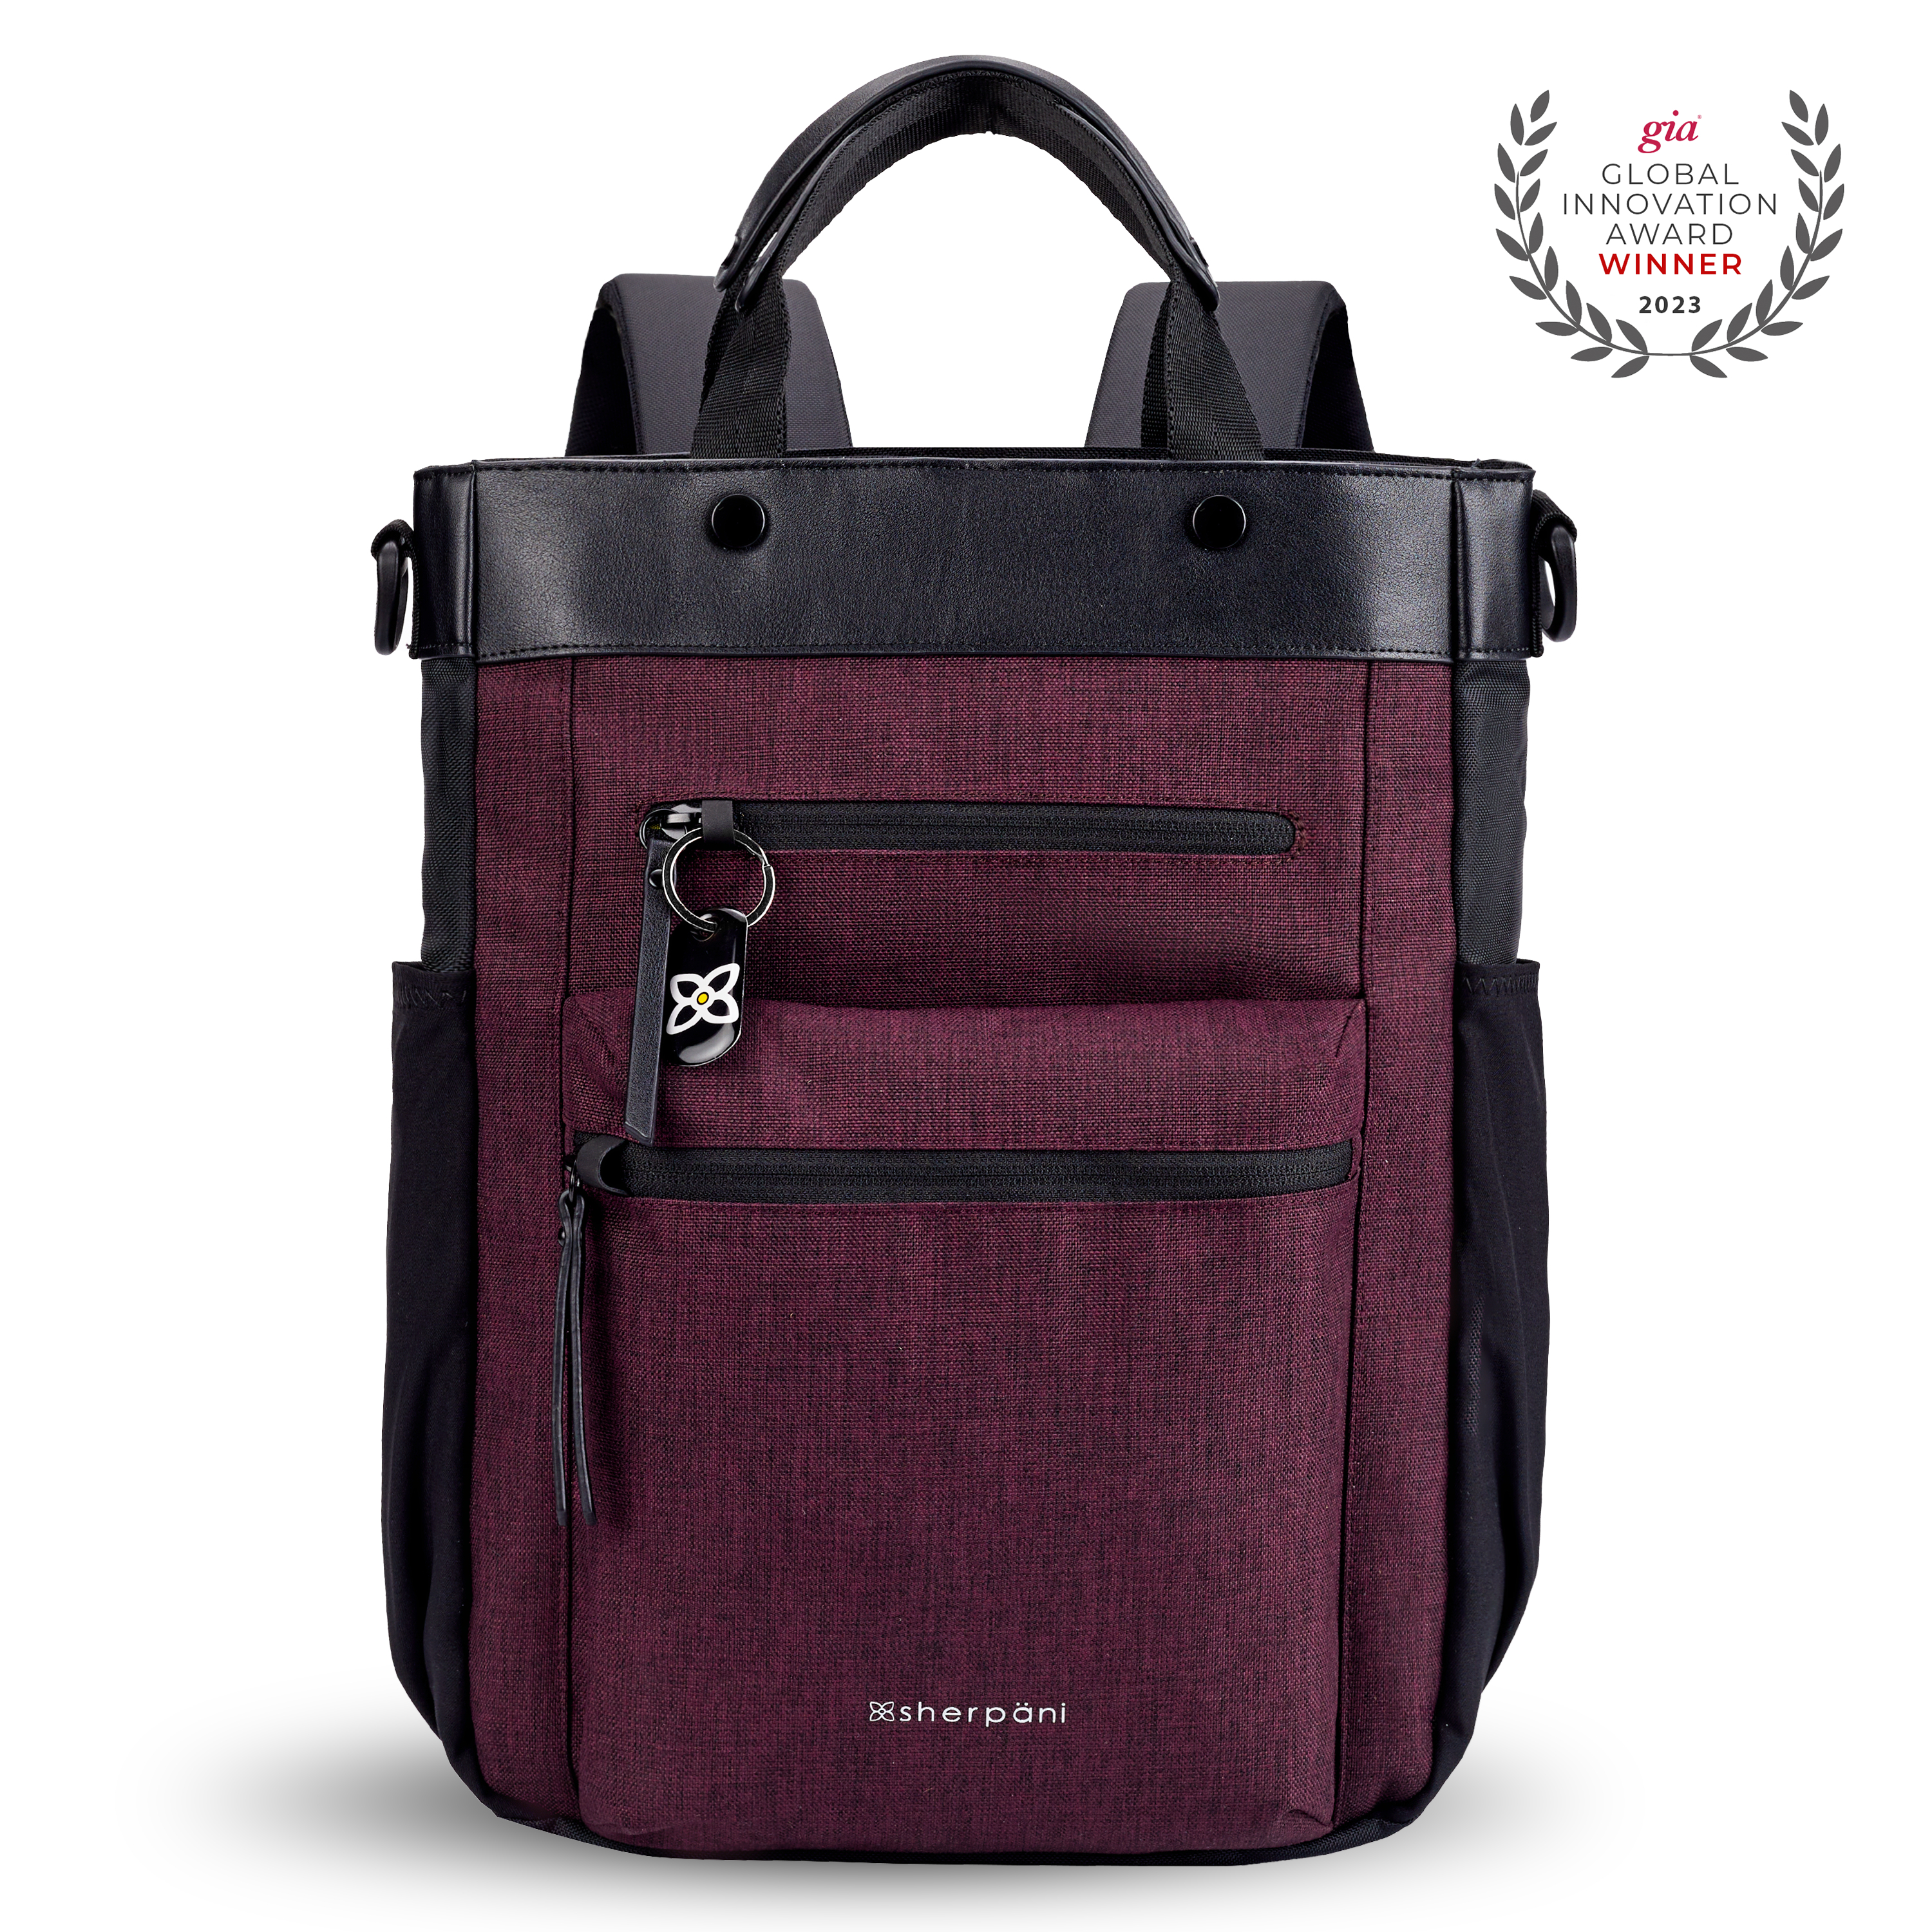 Flat front view of Sherpani's Anti-Theft bag, the Soleil AT in Merlot, with vegan leather accents in black. On the front are two locking zipper compartments, a ReturnMe tag is clipped to the upper one. Two elastic water bottle holders sit on either side of the bag. It has padded backpack straps, short tote handles, and a place to attach a crossbody strap. 